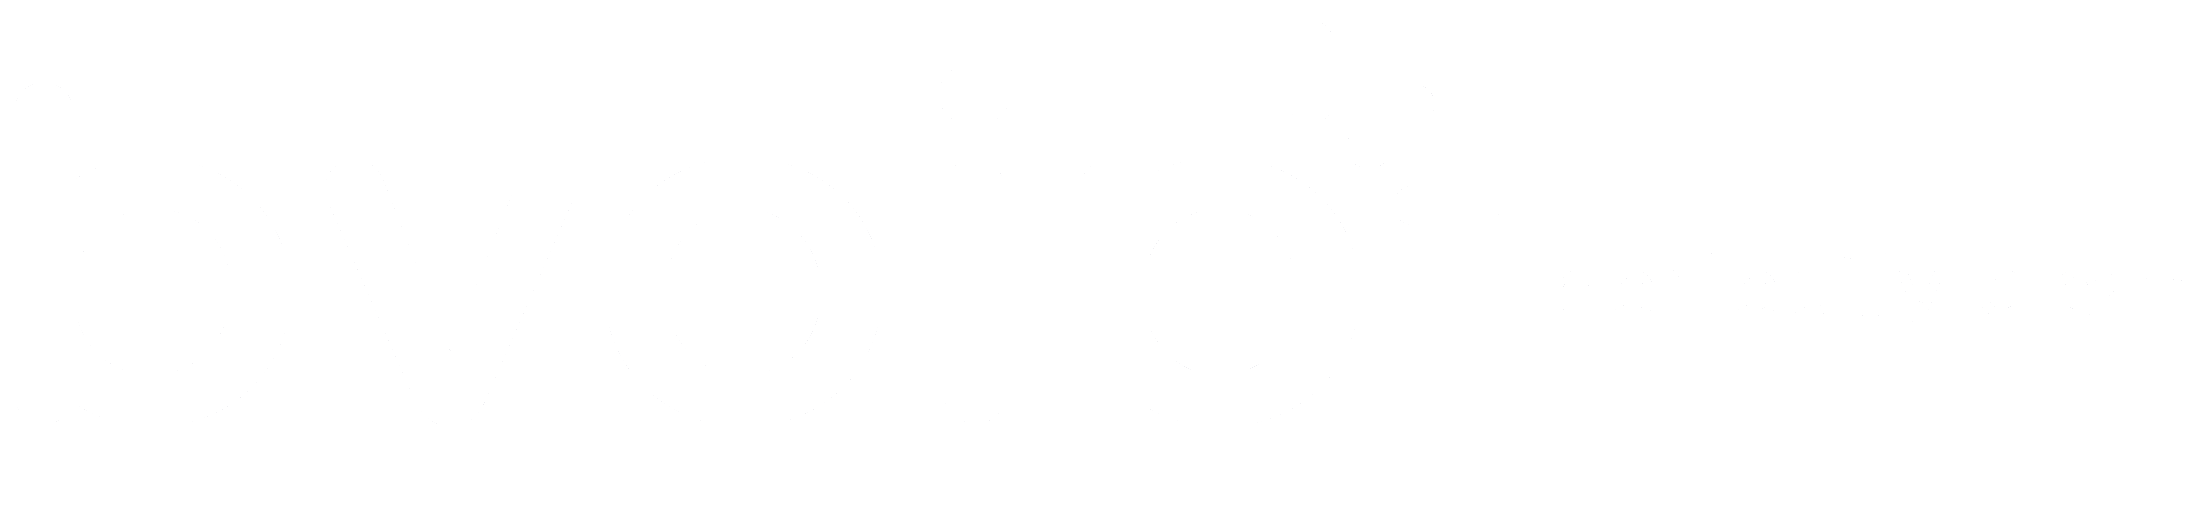 white bvoip logo - perfectly clear